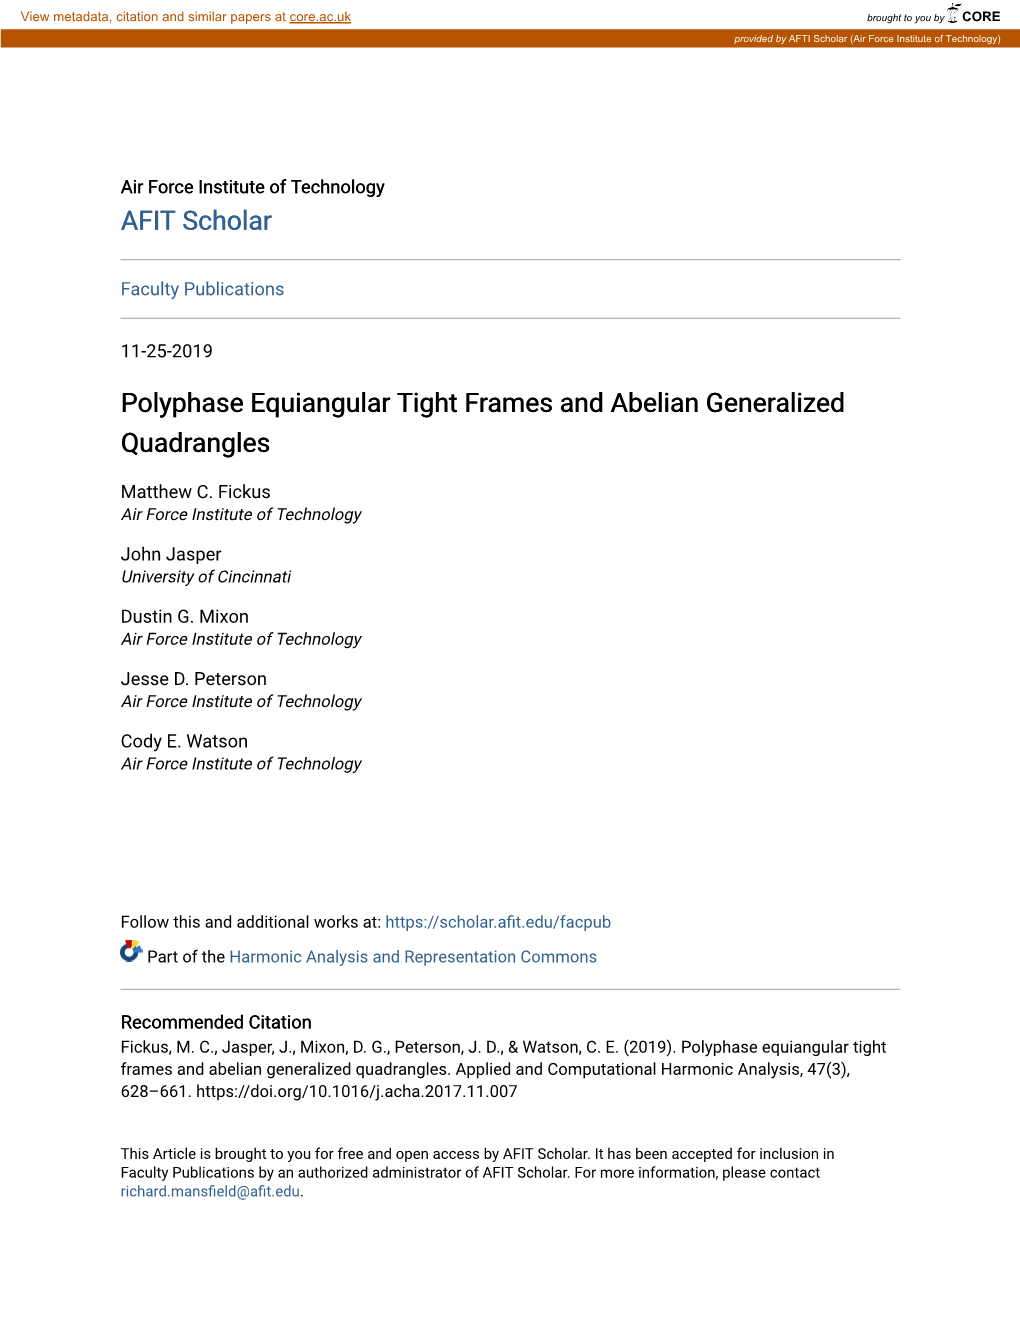 Polyphase Equiangular Tight Frames and Abelian Generalized Quadrangles